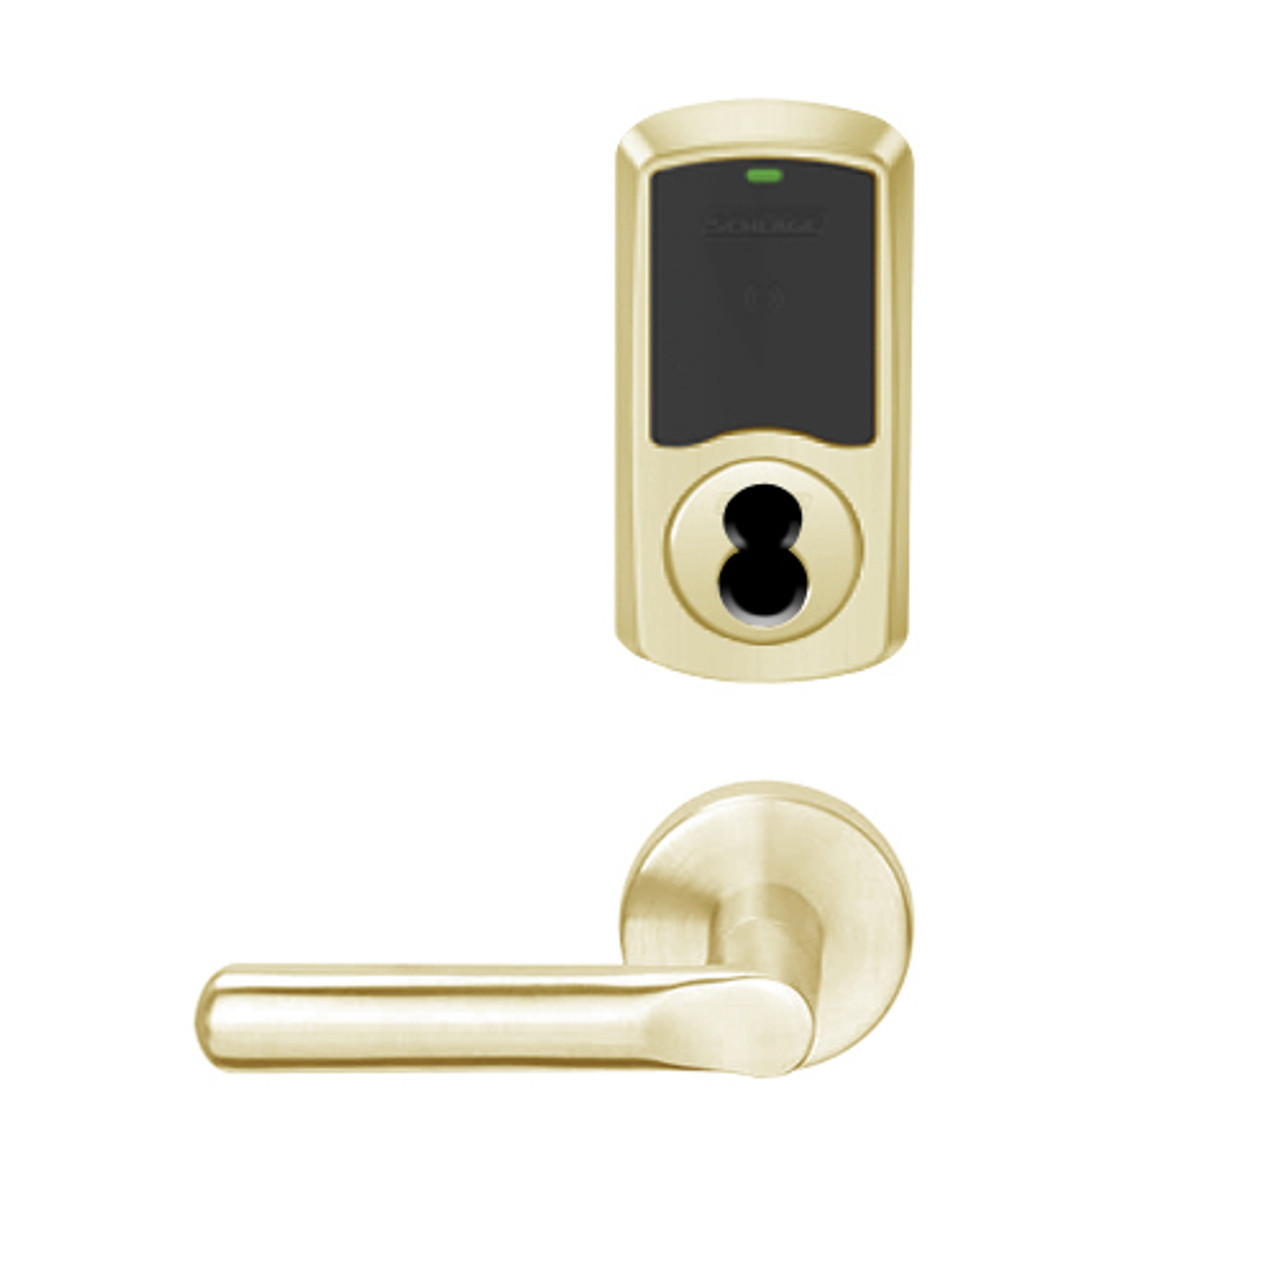 LEMS-GRW-BD-18-606-00B Schlage Storeroom Wireless Greenwich Mortise Lock with LED Indicator and 18 Lever Prepped for SFIC in Satin Brass